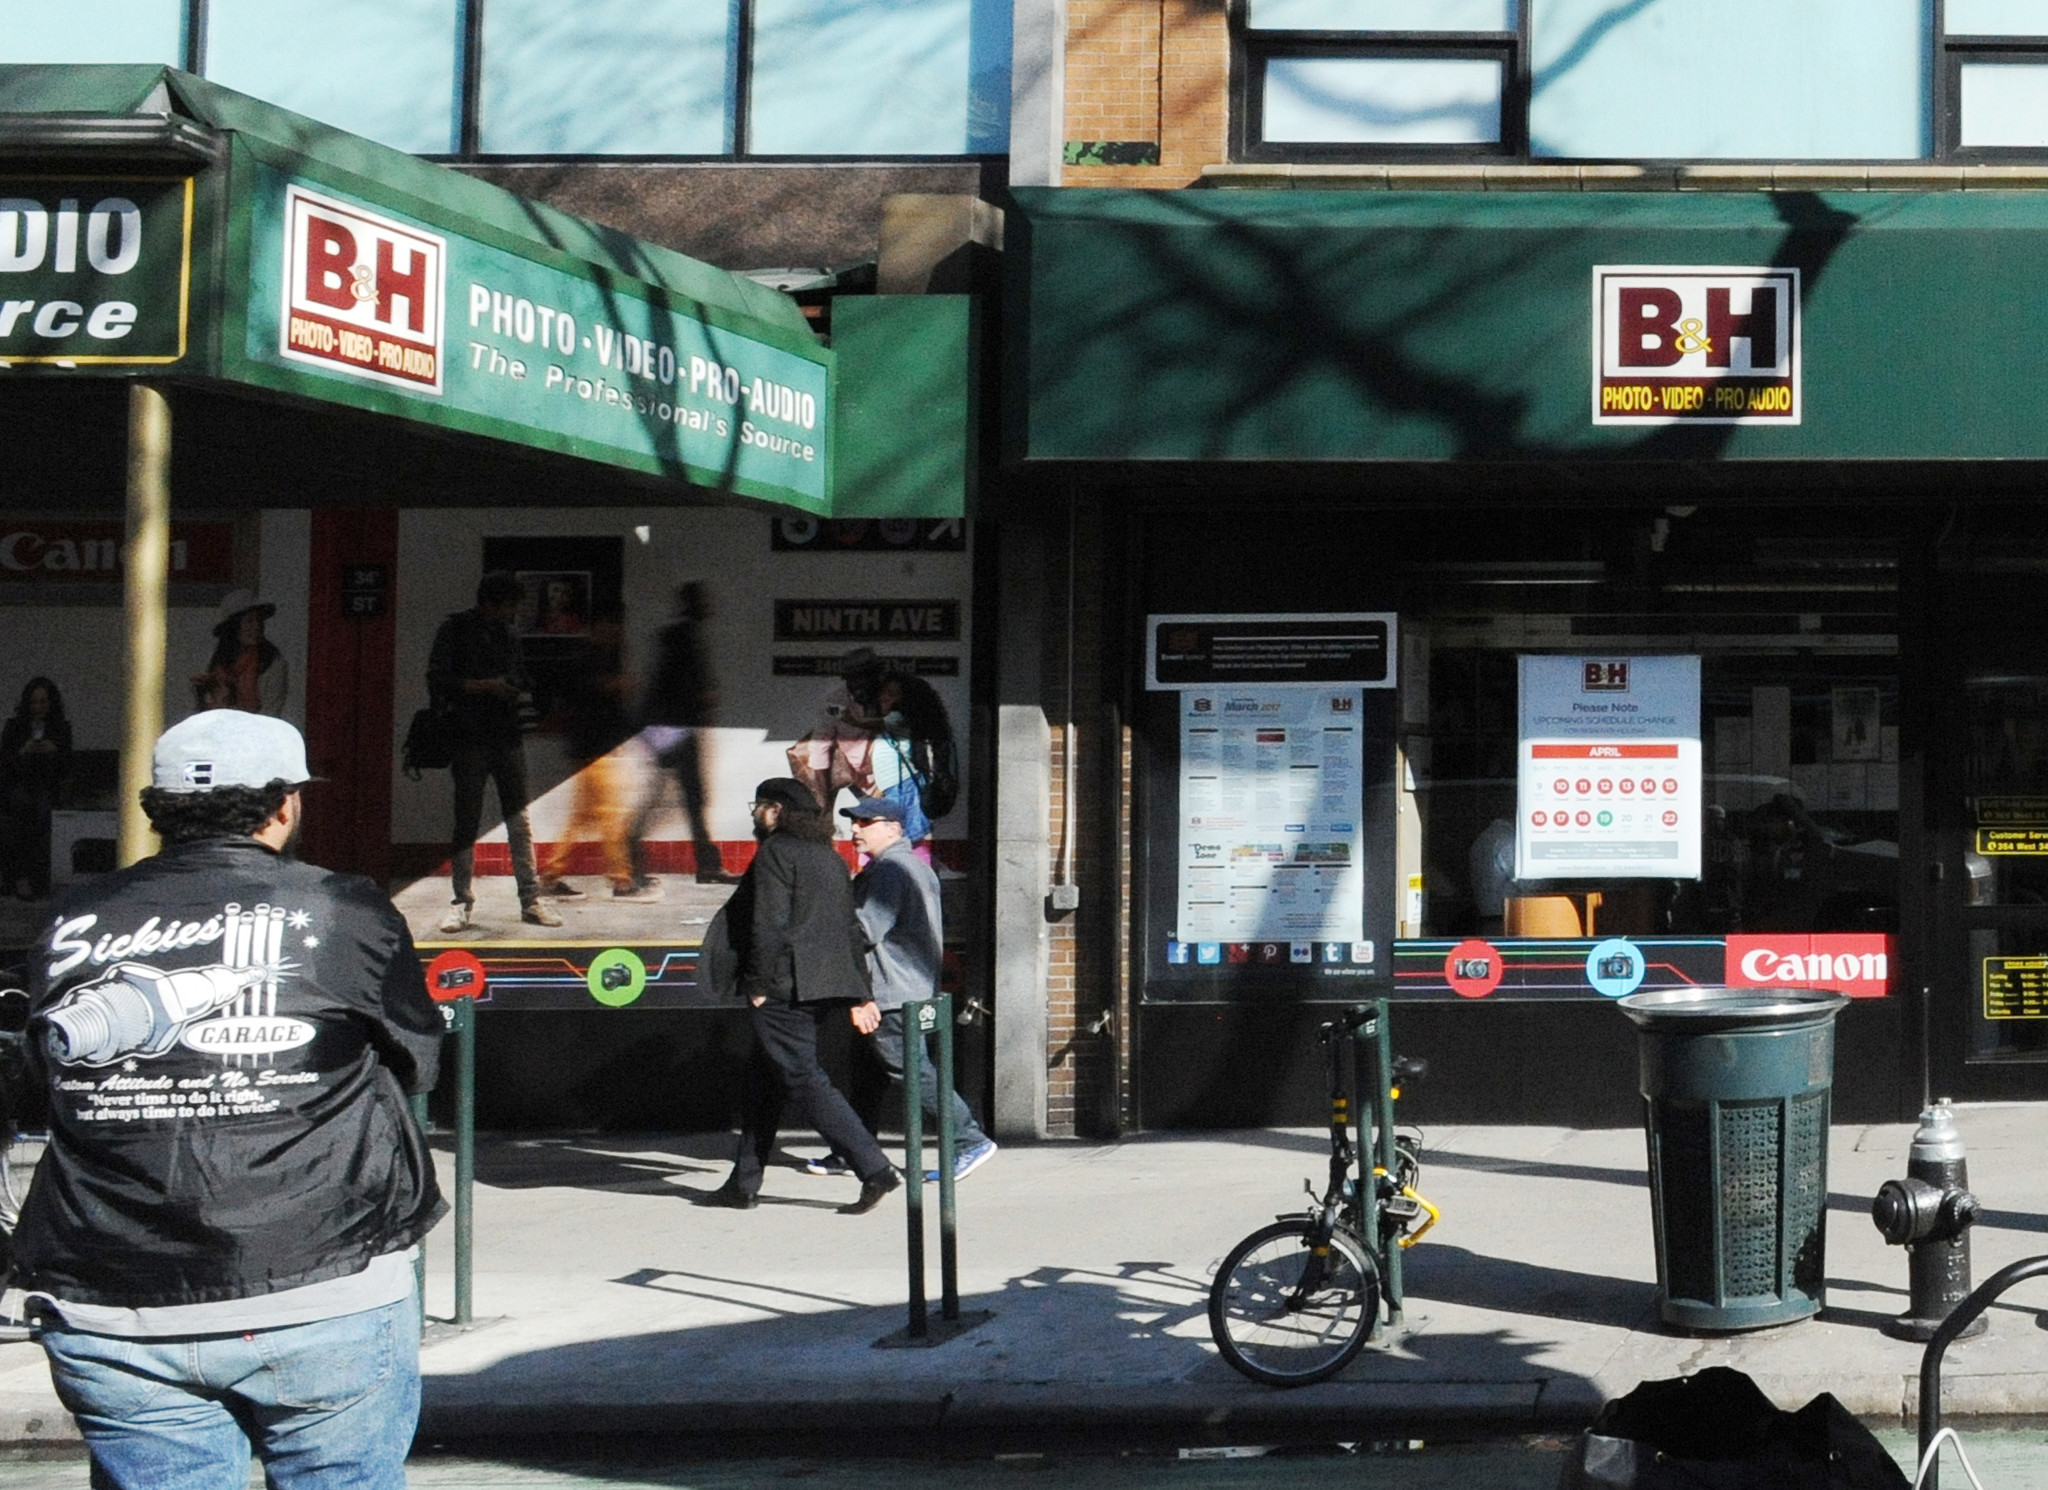 Camera megastore B&H dodged millions in state taxes, according to New York attorney general Letitia James